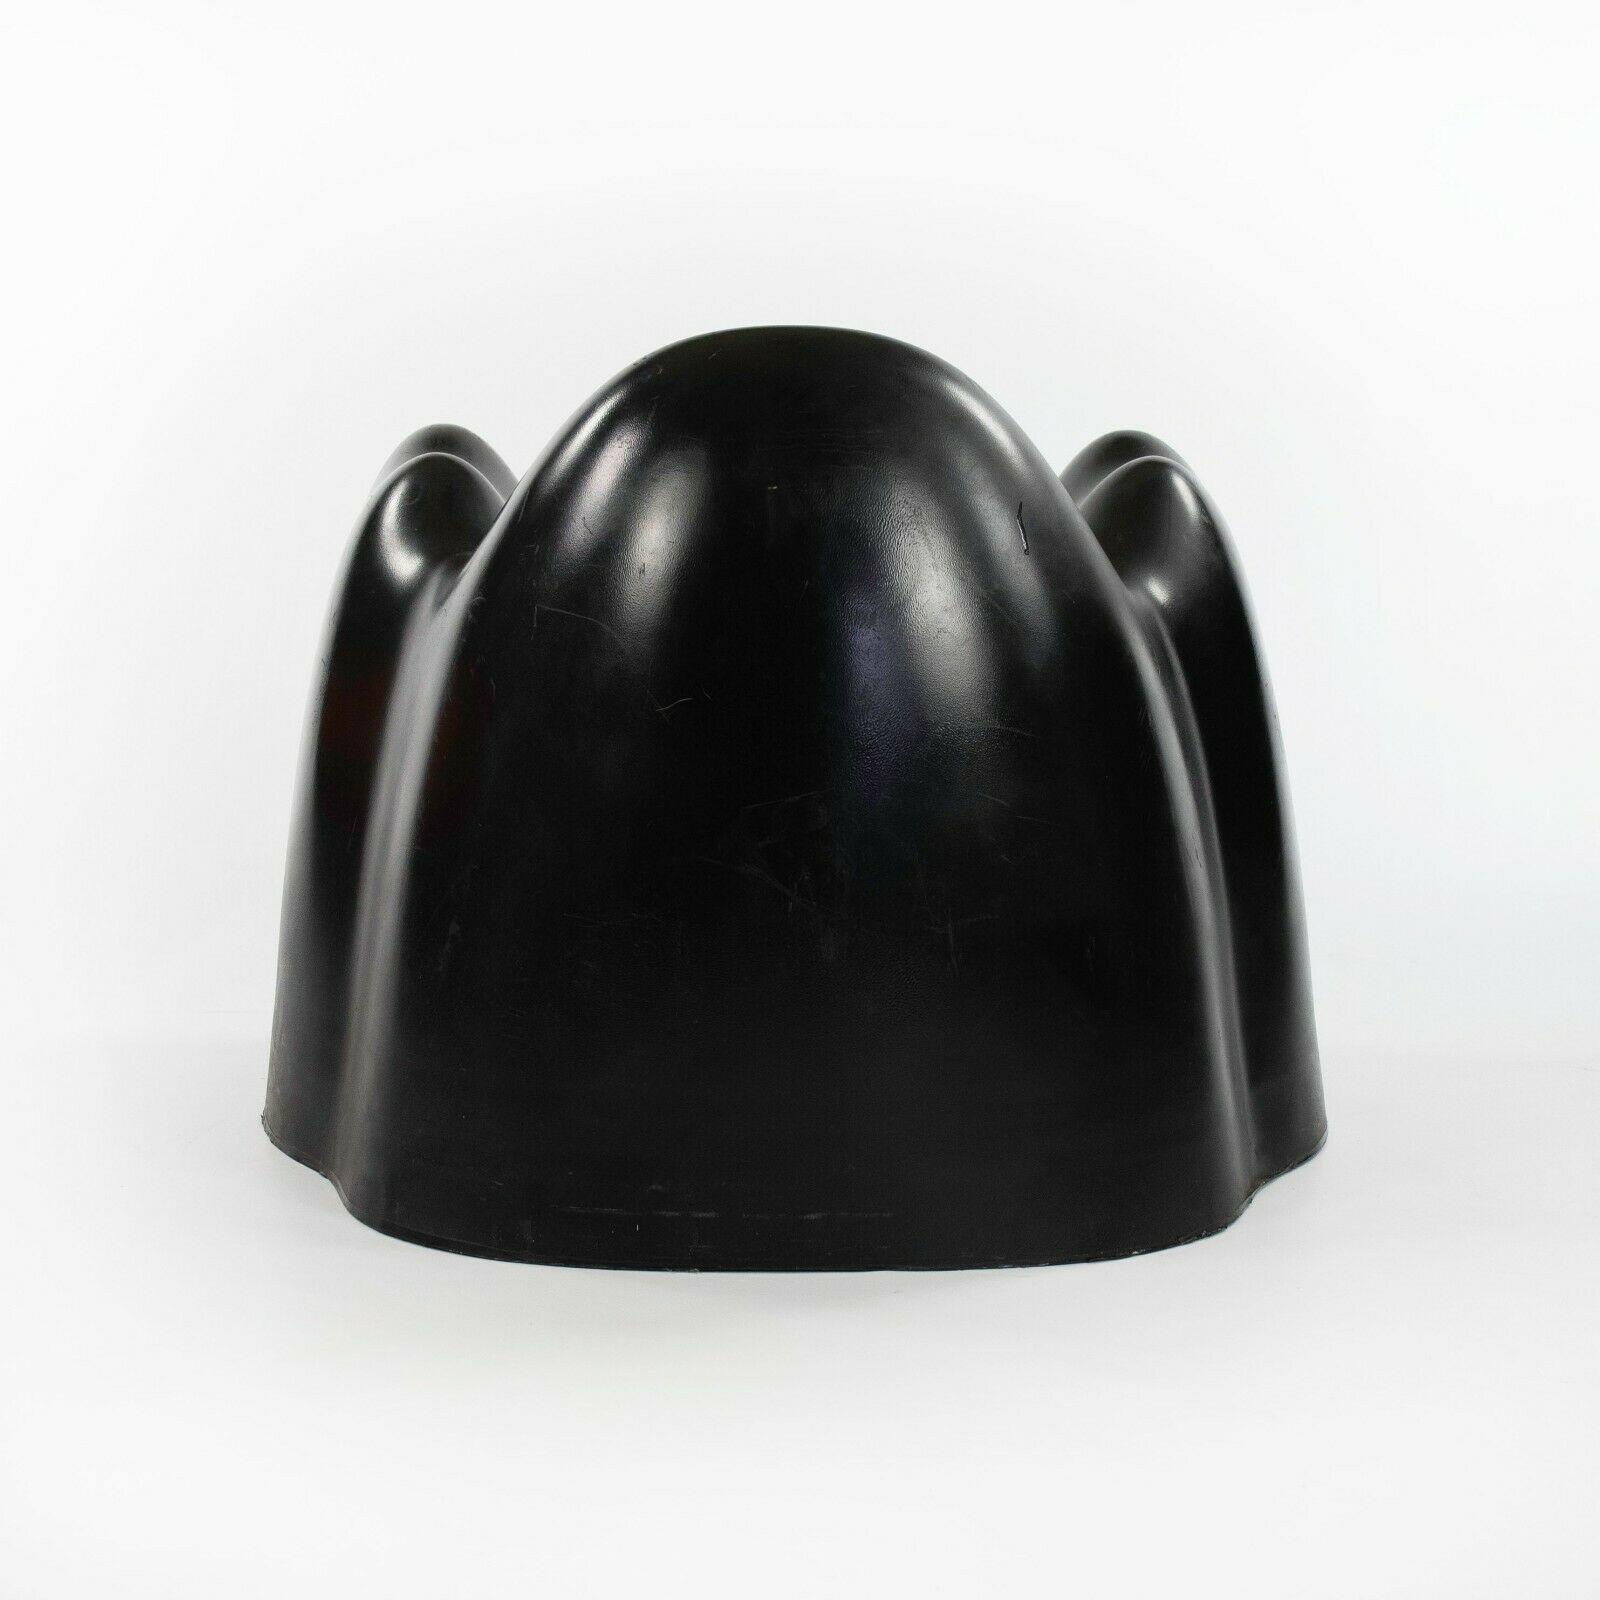 1970s Wendell Castle Molar Chair in Black Fiberglass by Northern Plastics of Syracuse